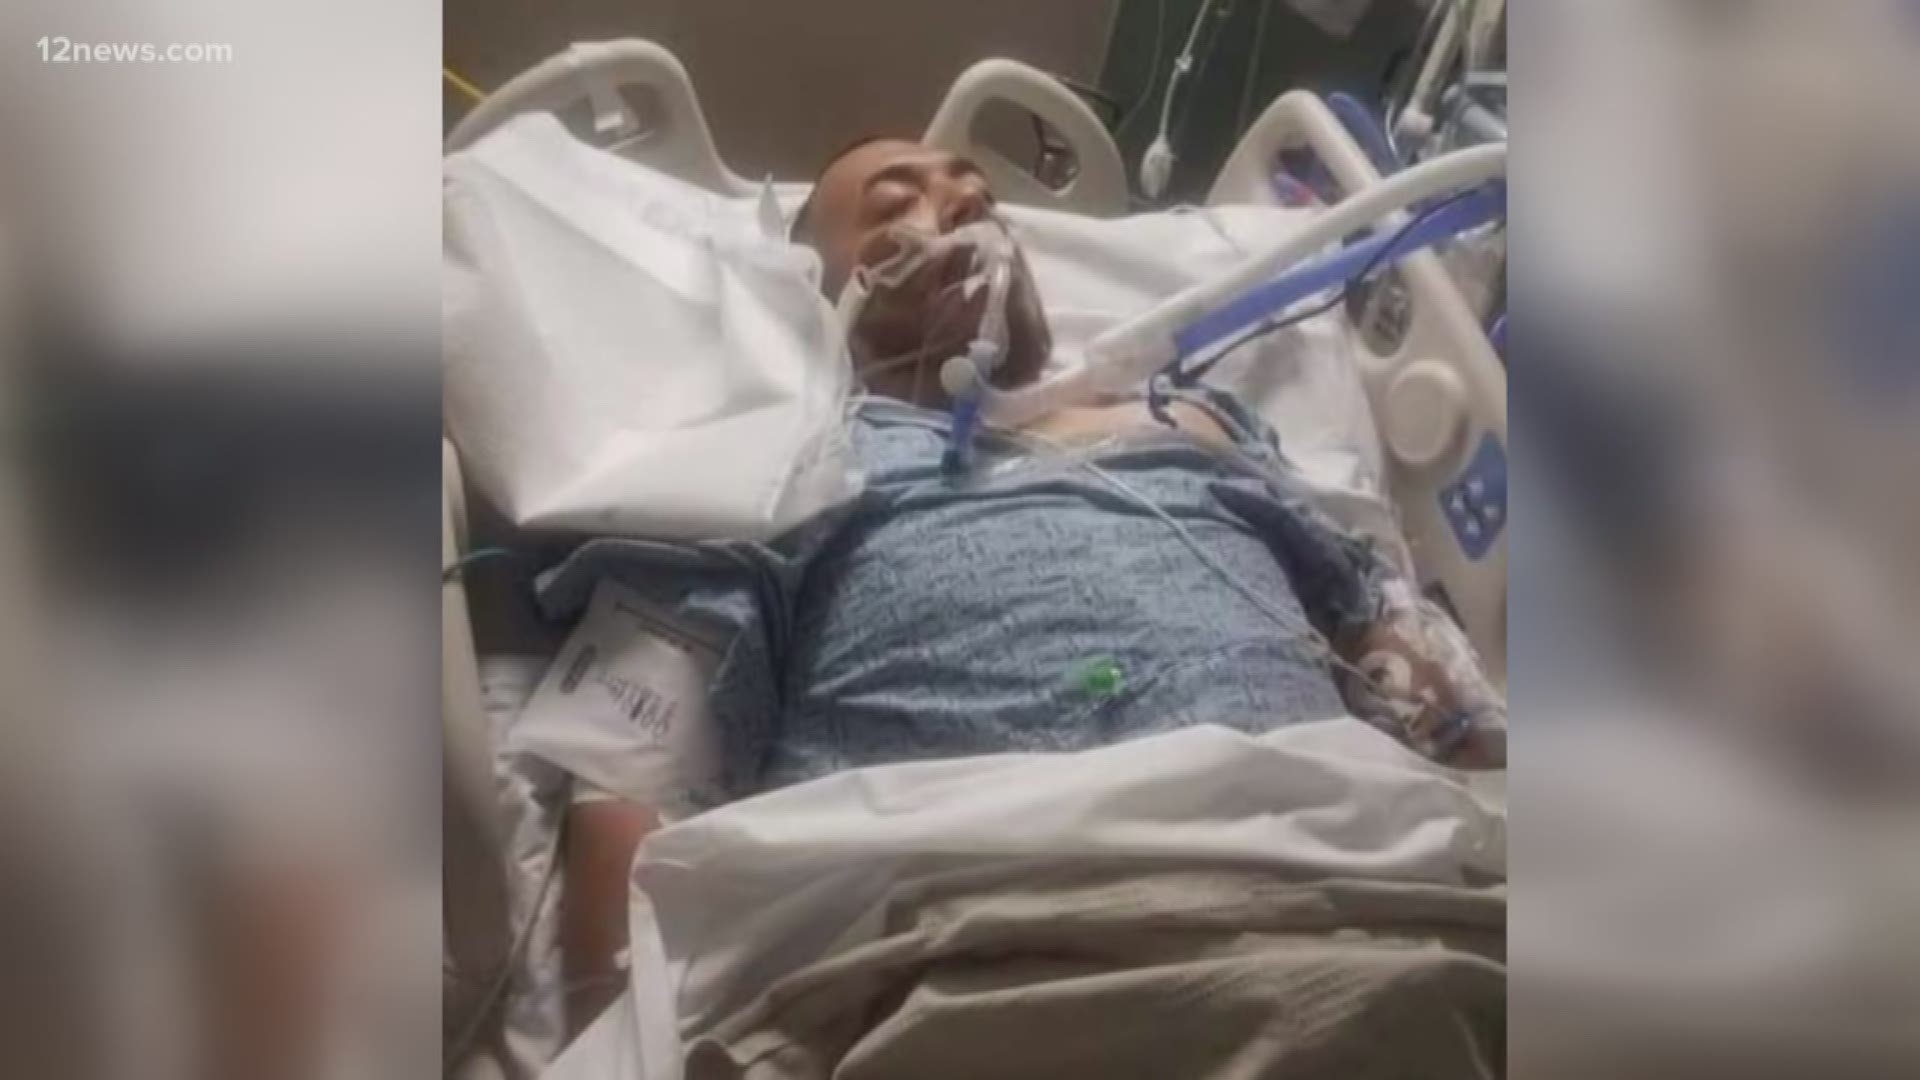 He said he was shot 13 times in front of his wife and kids after another driver rear-ended him.